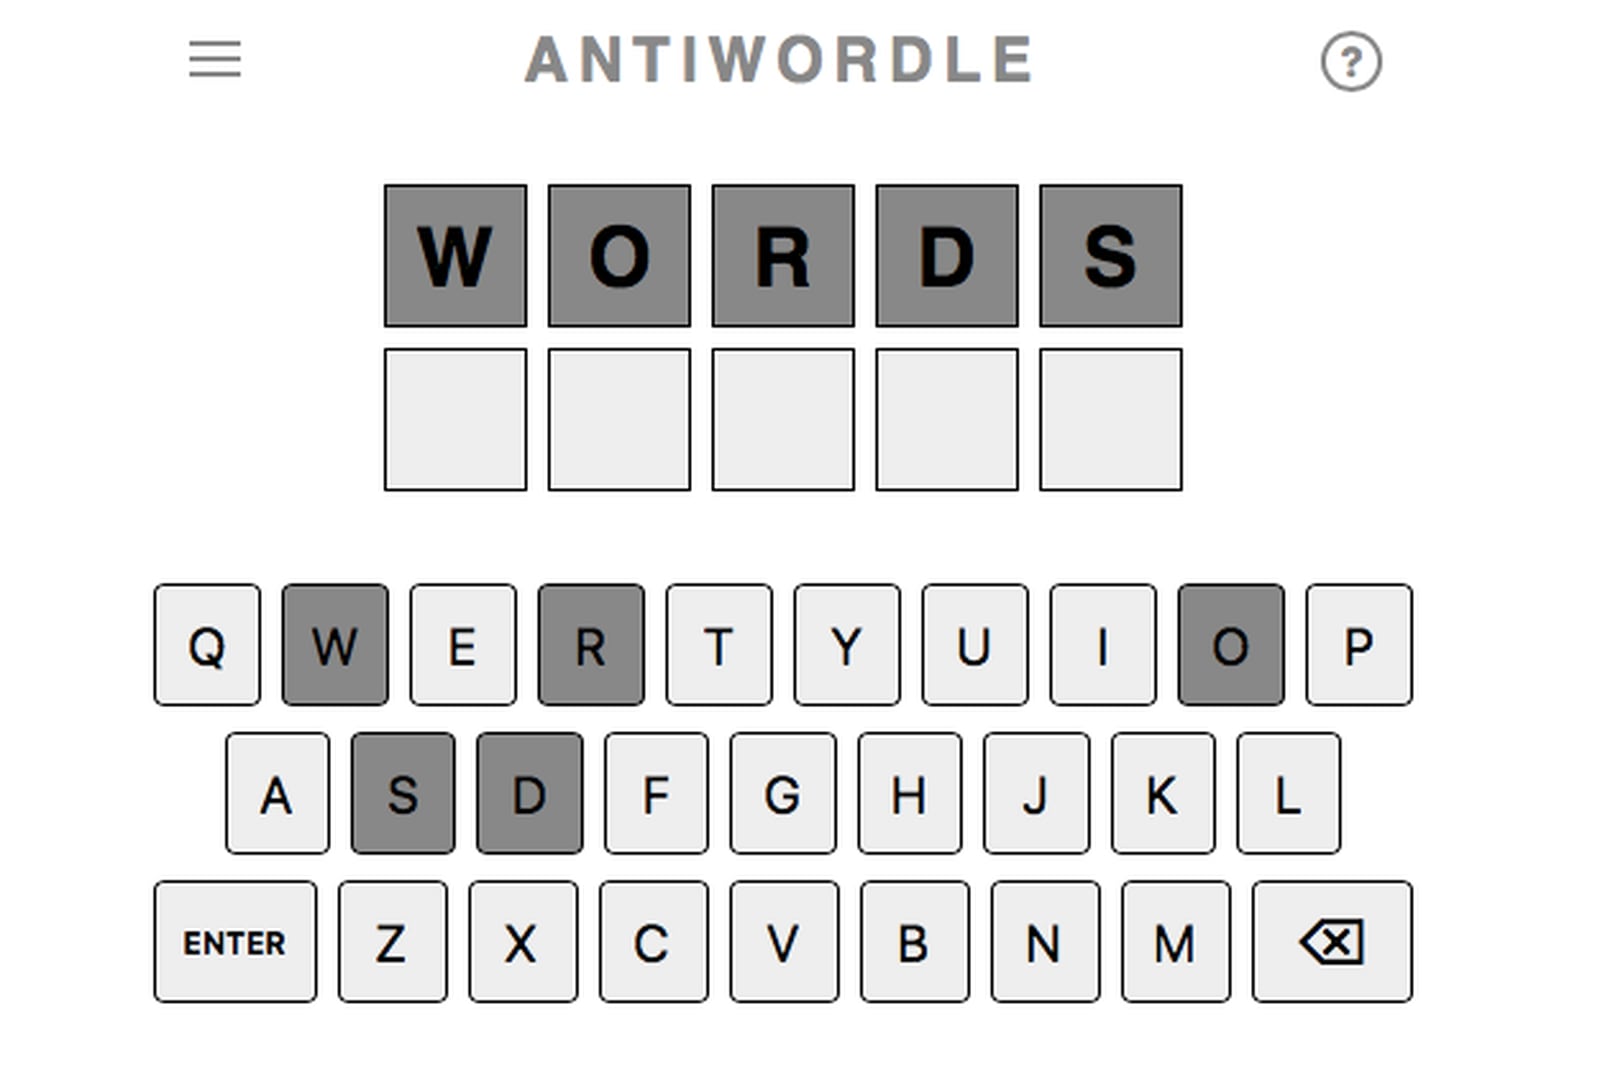 What is Antiwordle? The Wordlestyle game that doesn't allow you to